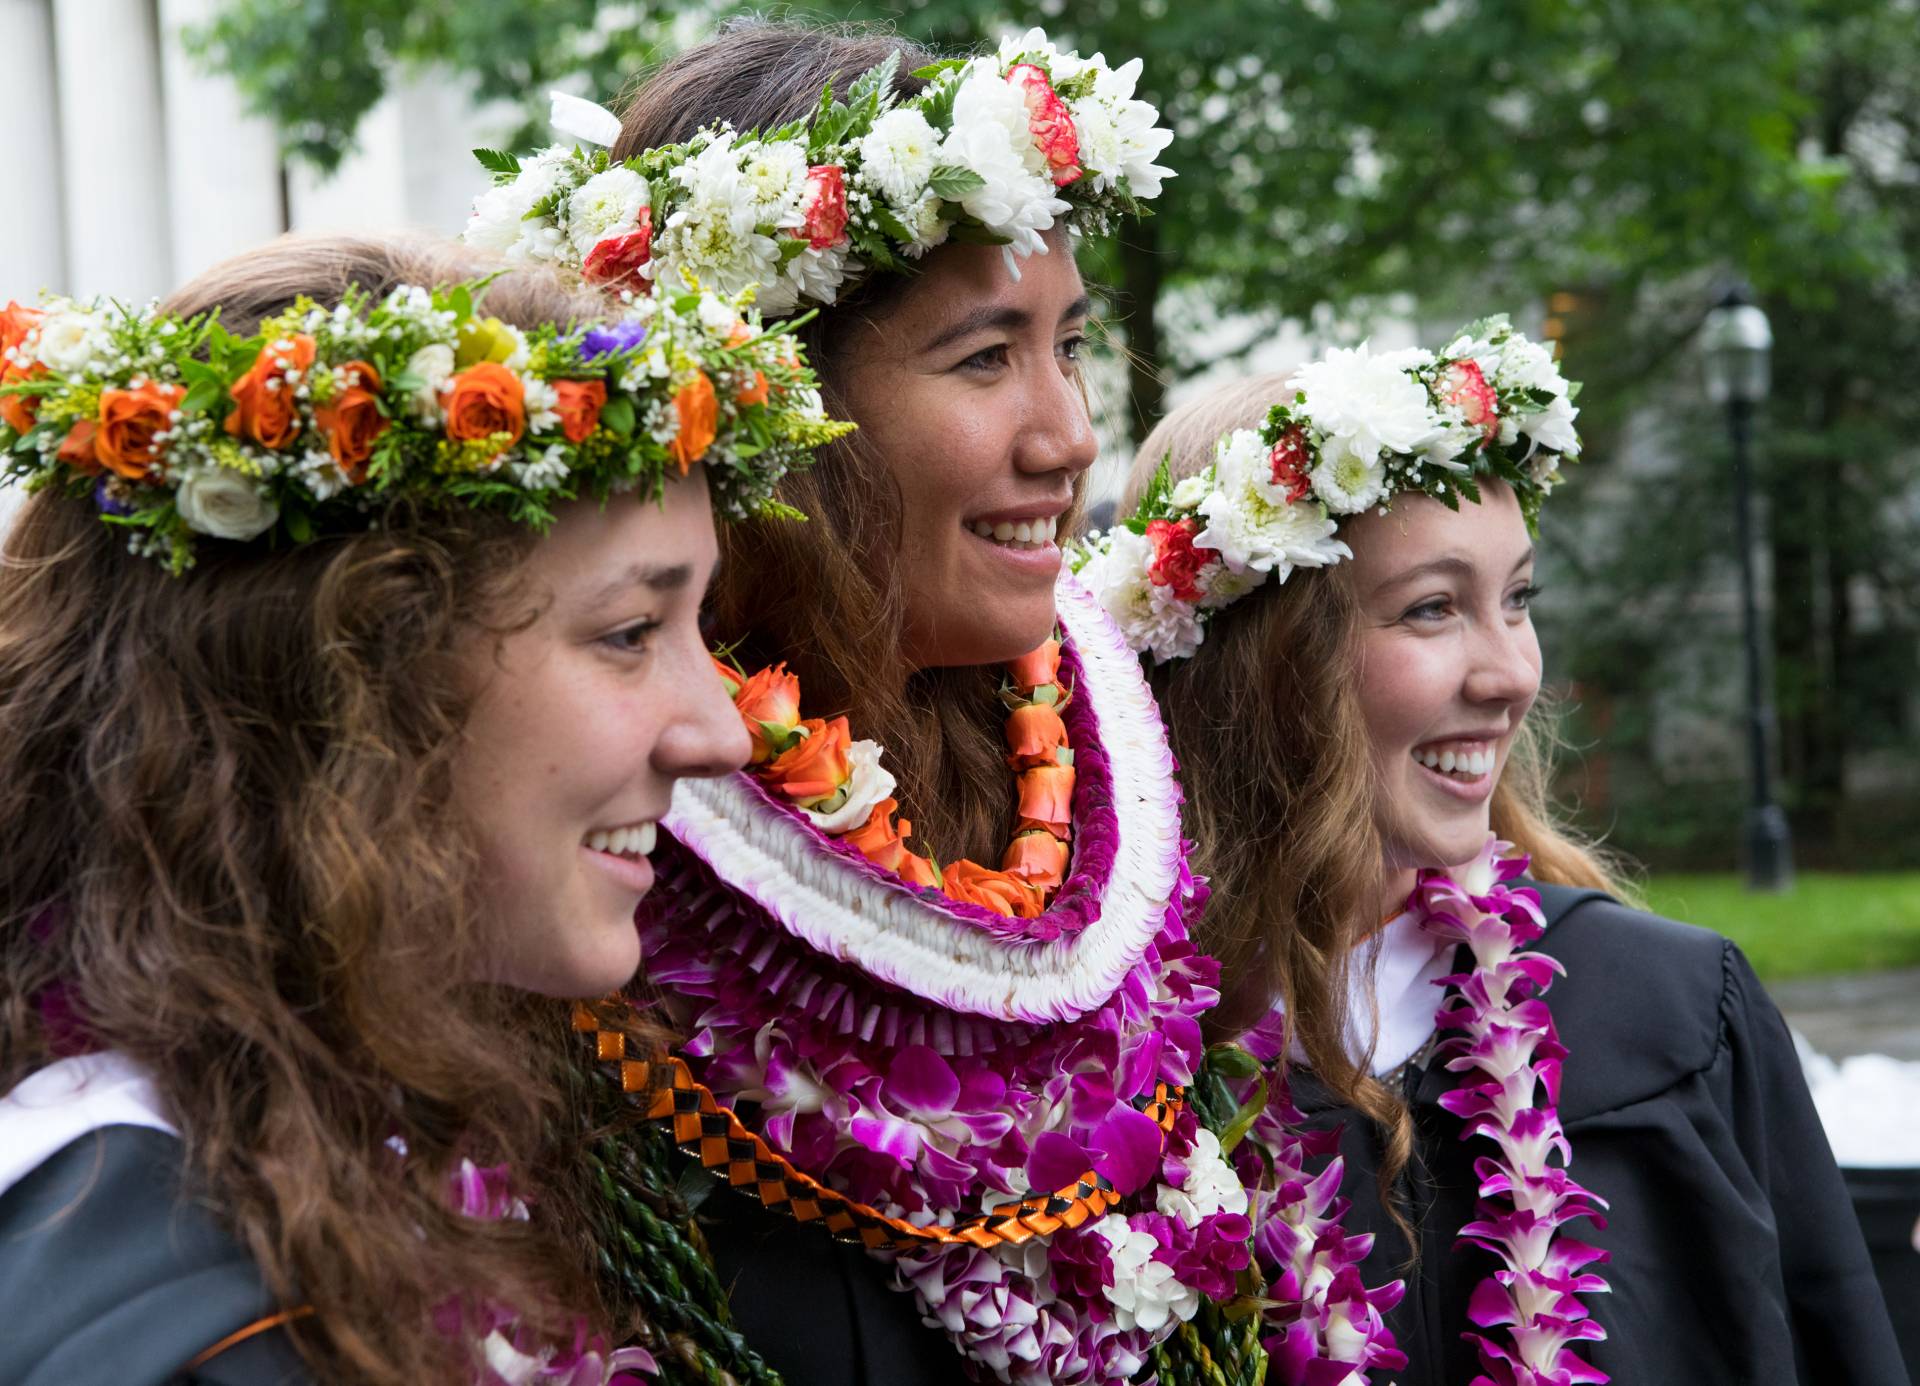 Students decked with leis after Commencement 2017 ceremony